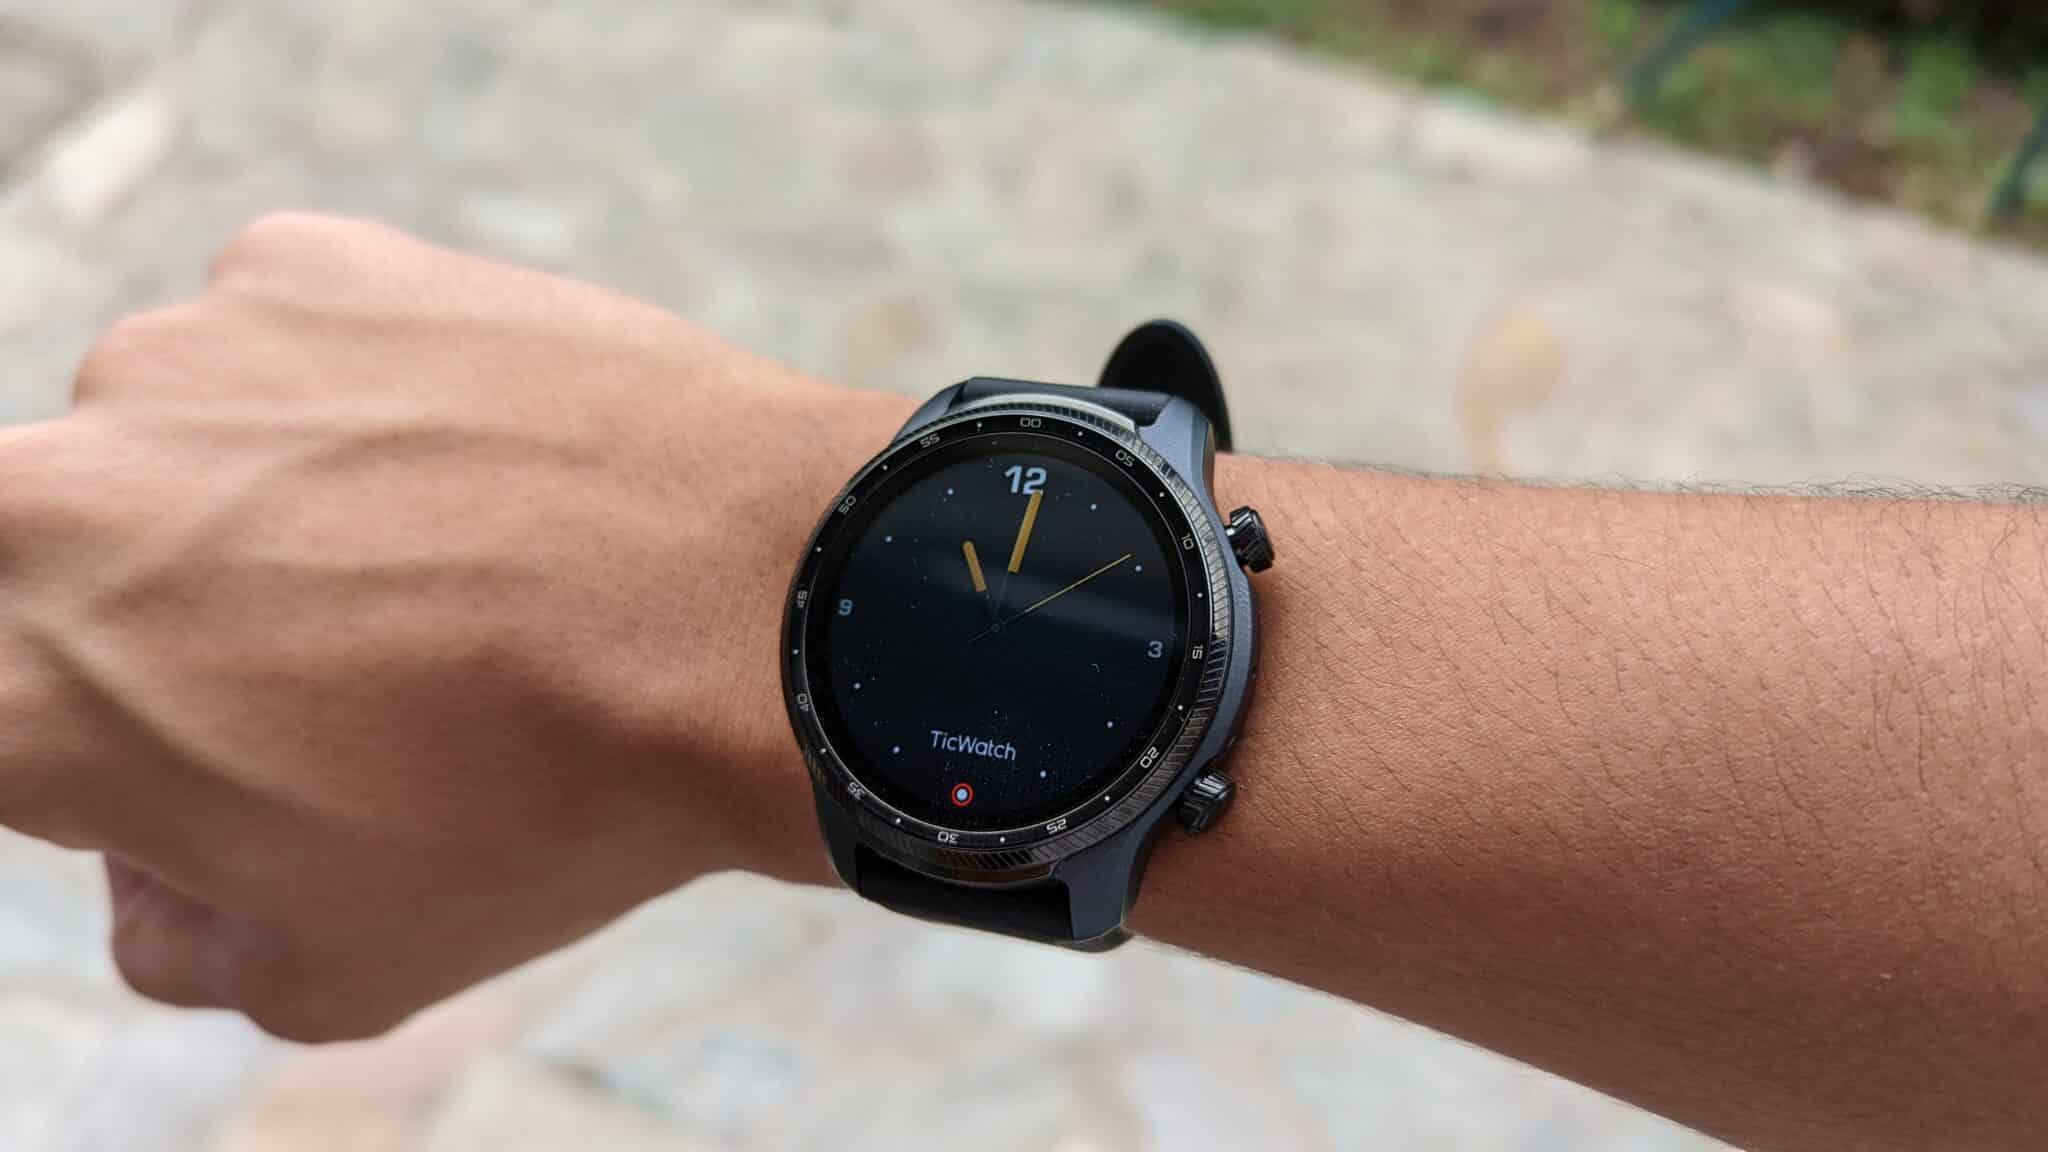 TEST – TicWatch Pro 3 Ultra GPS : Une montre incontournable sous Wear OS Tests Android